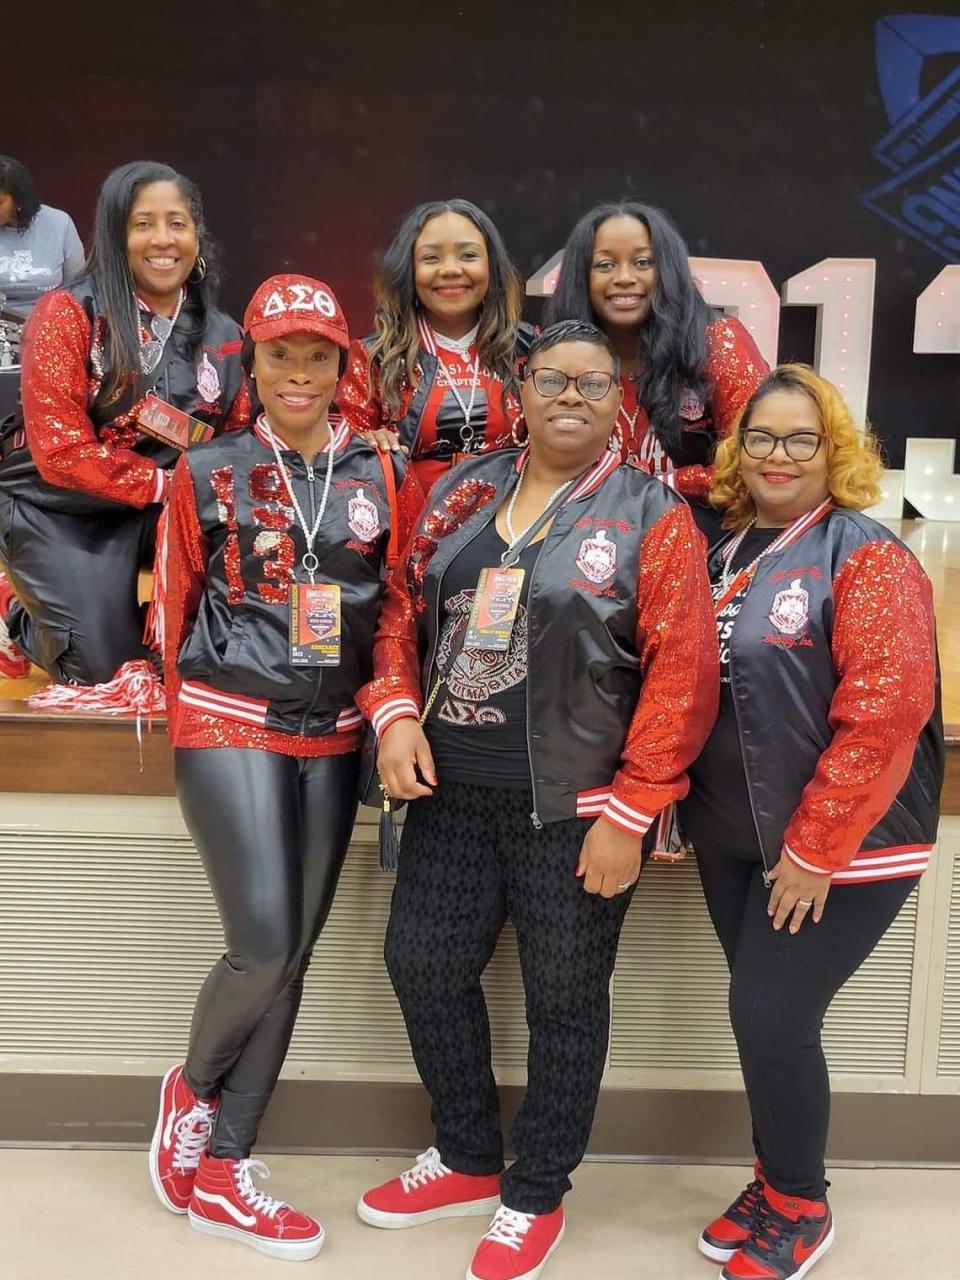 A group of Deltas poses for a photo in the sorority’s signature red colors.